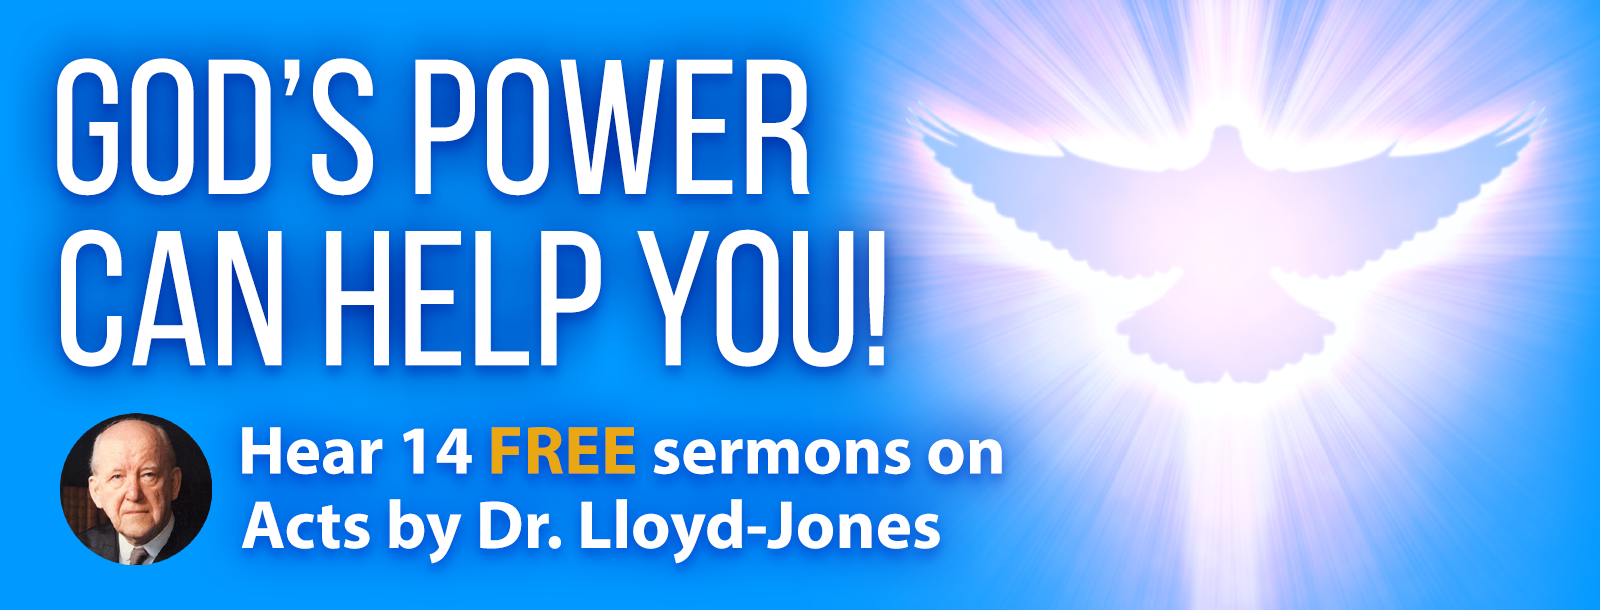 God the Father Cares for You - Hear 14 FREE sermons about God's love from Dr. Martyn Lloyd-Jones